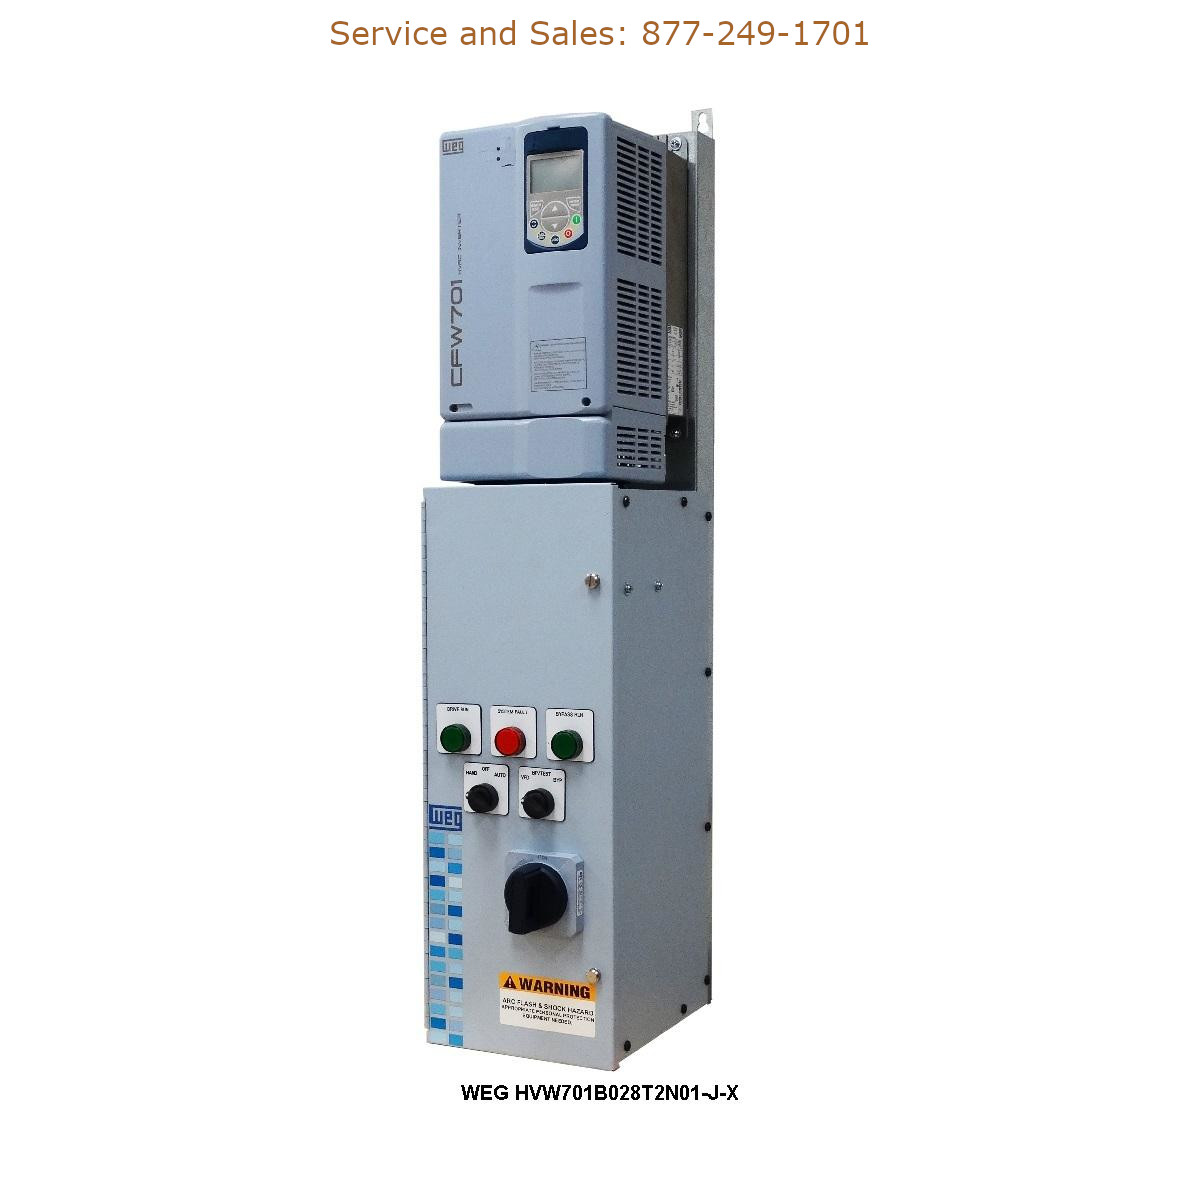 WEG HVW701B028T2N01-J-X WEG Model Number HVW701B028T2N01-J-X WEG Drives, Variable Speed Drives Repair Service, Troubleshooting, Replacement Parts https://gesrepair.com/wp-content/uploads/2022/WEG/WEG_HVW701B028T2N01-J-X_Drives_Variable_Speed_Drives.jpg